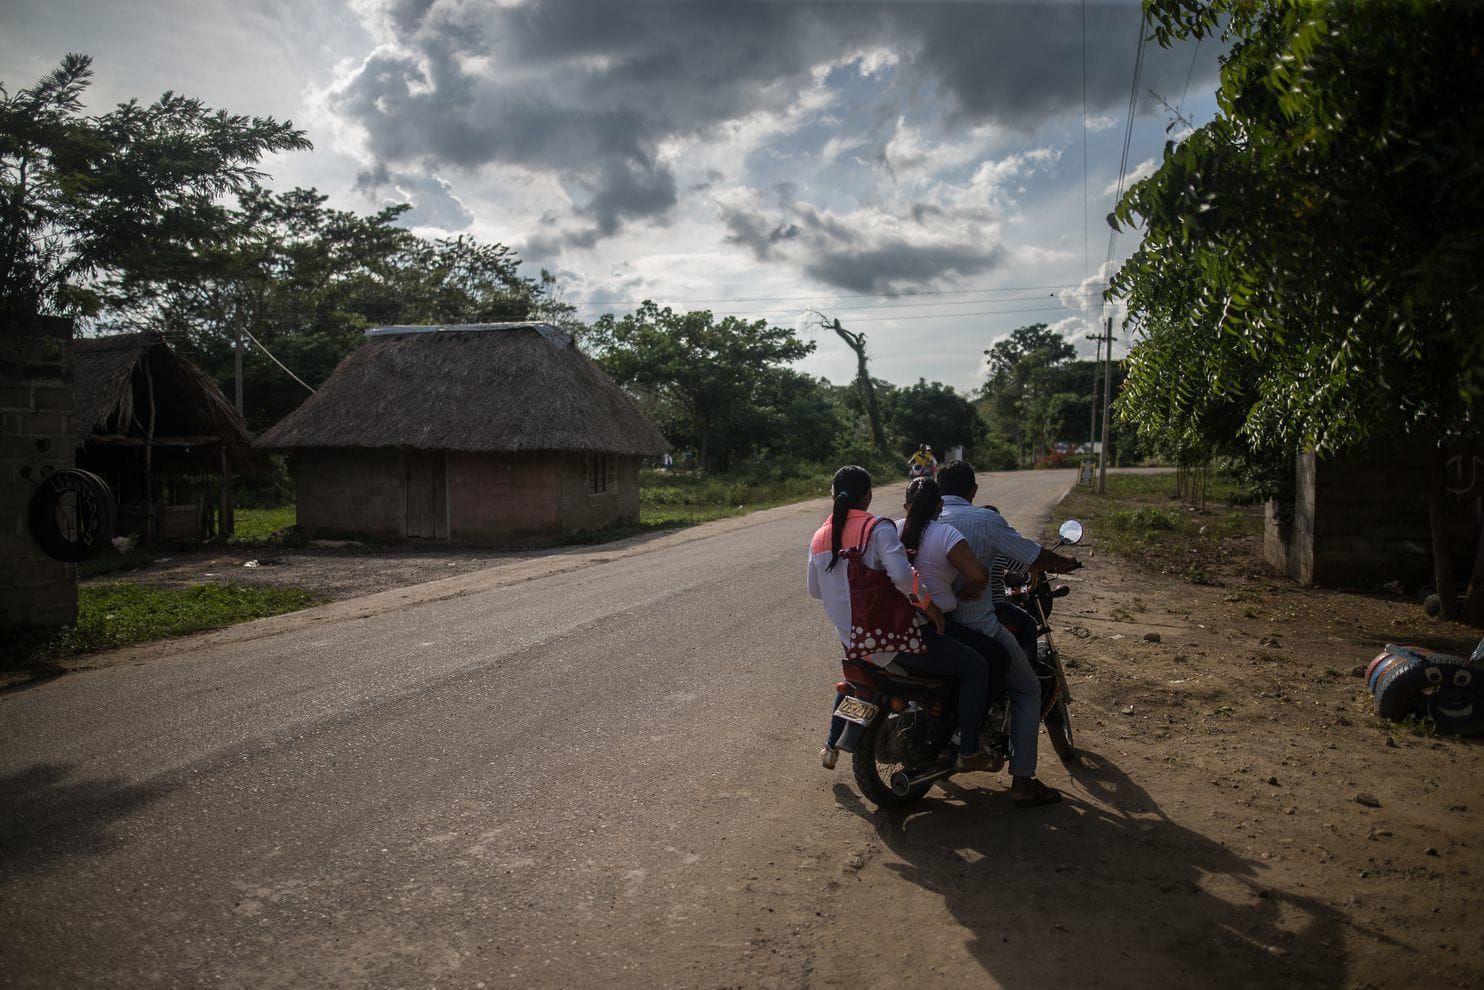 A family rides a motorcycle taxi to the clinic in Pichilín. Image by Ivan Valencia/For The Washington Post. Colombia, 2018.